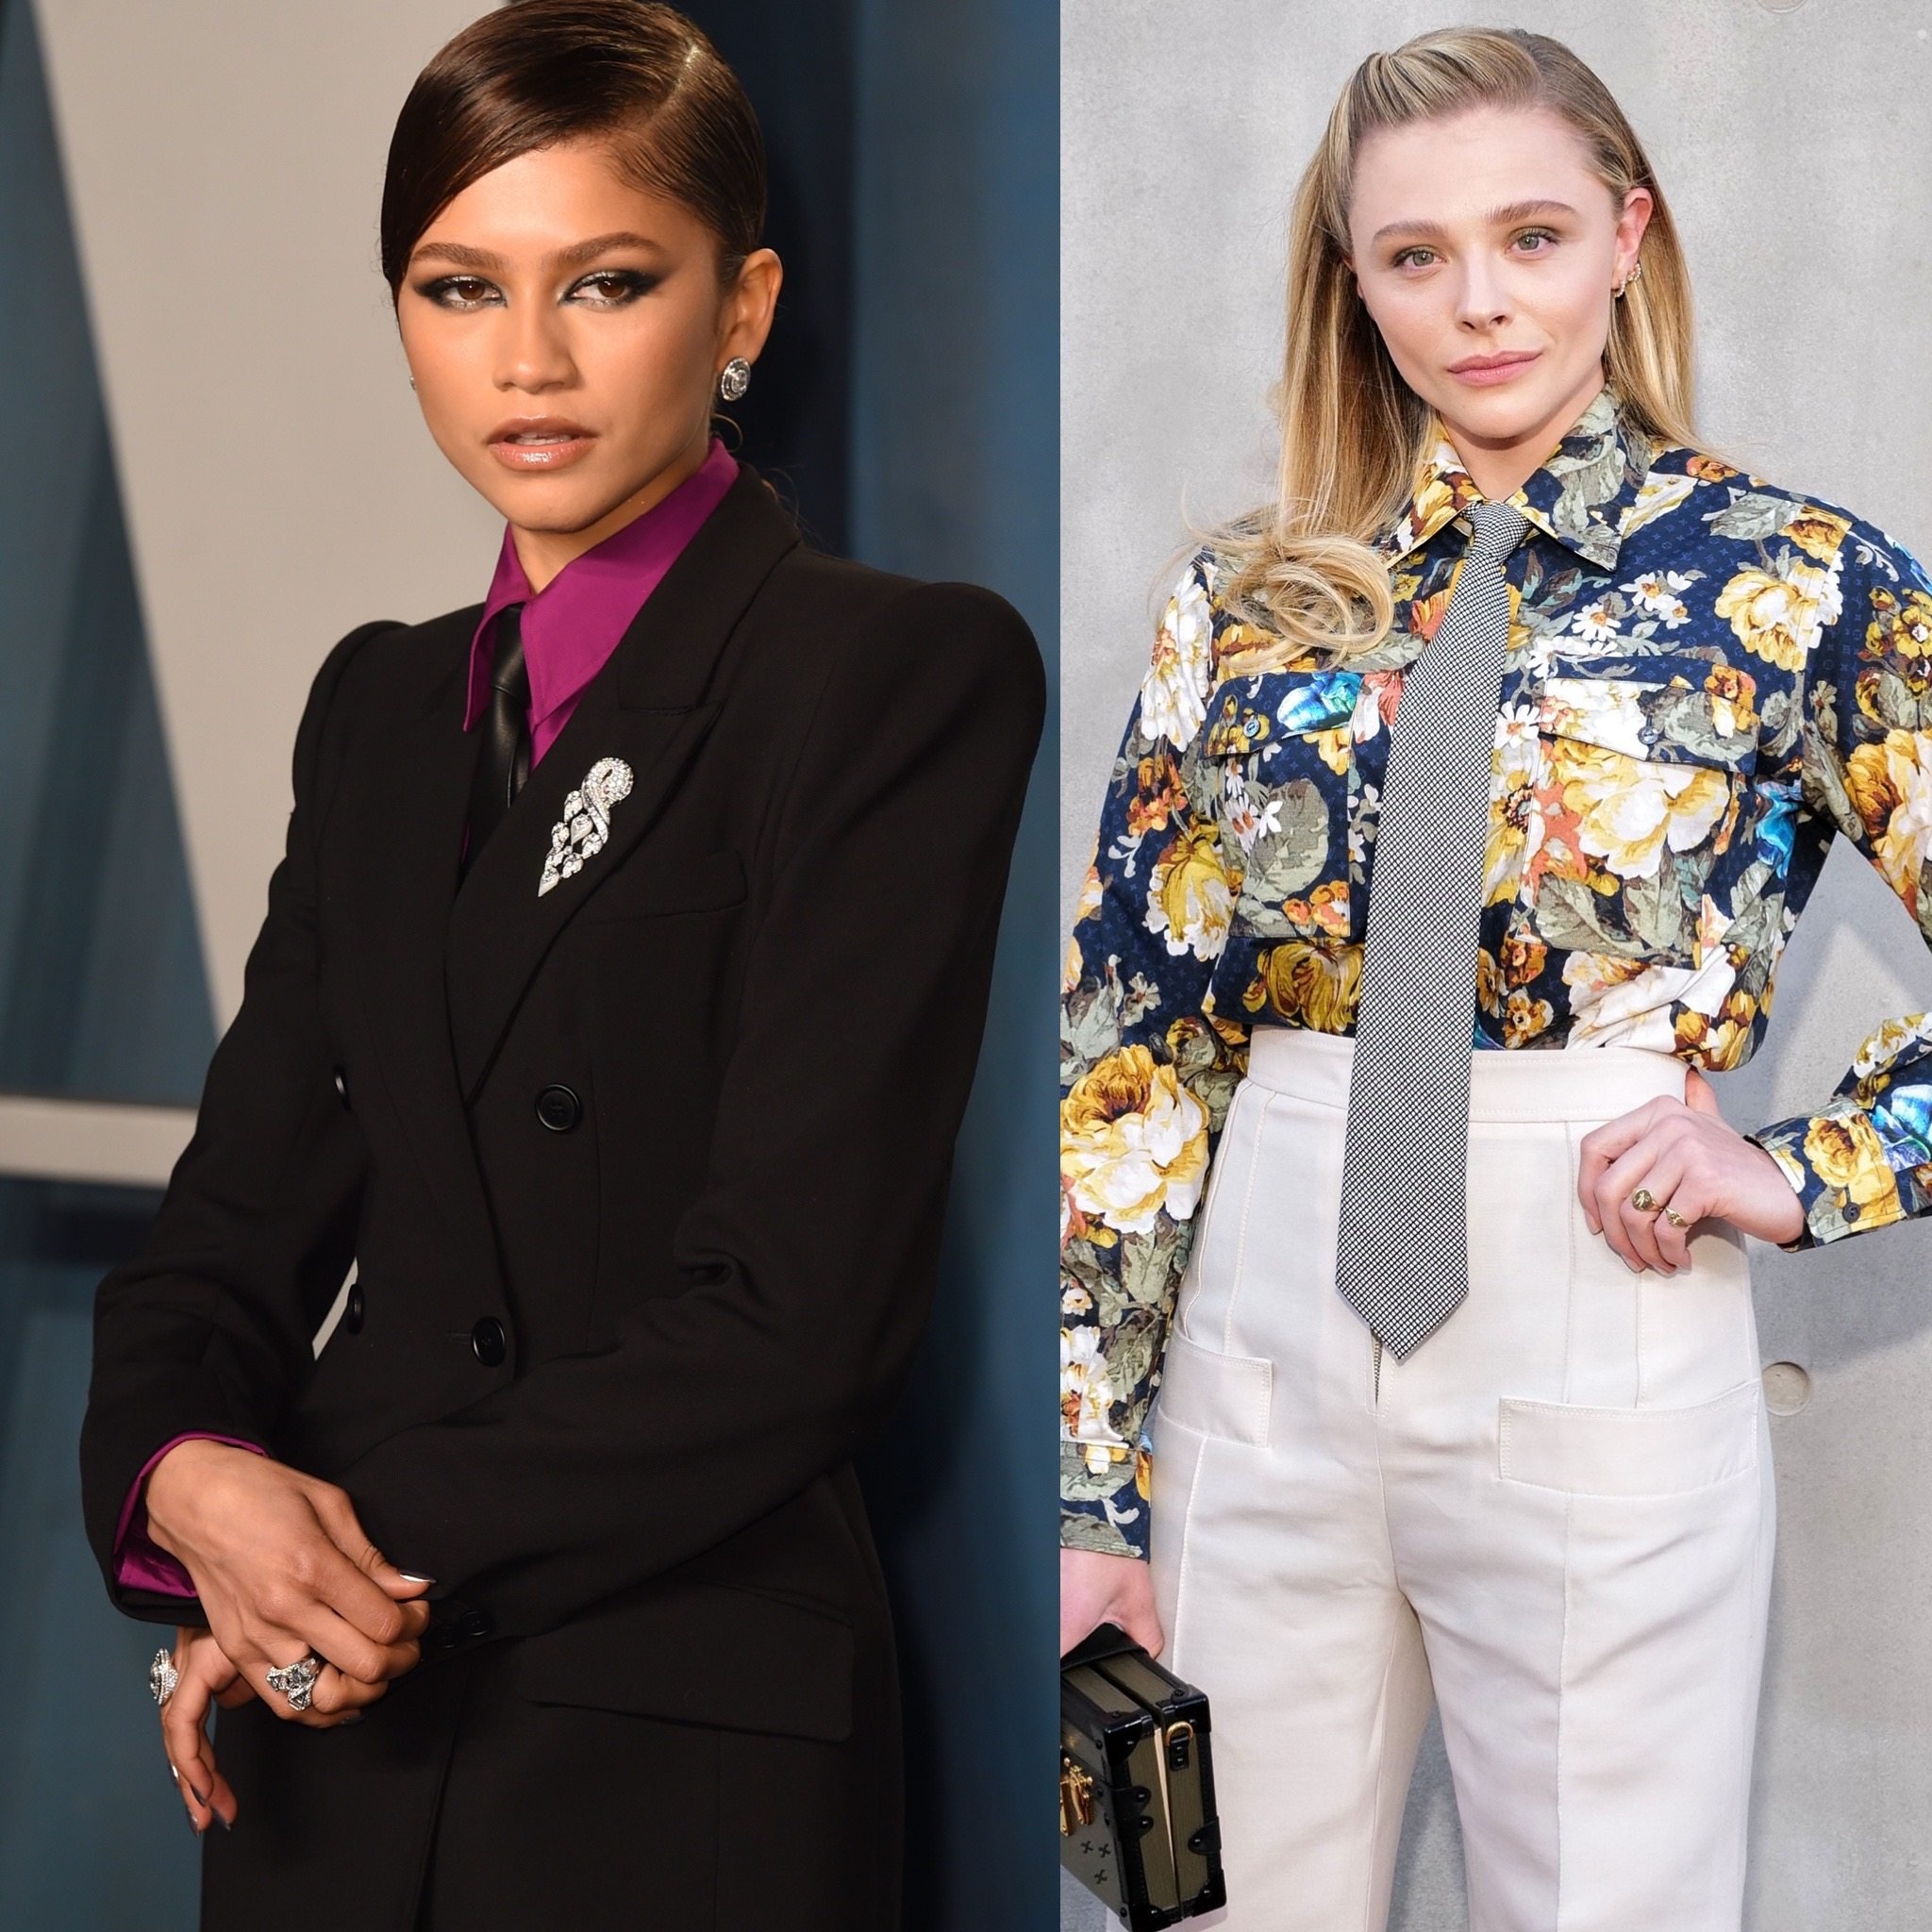 Chloe Moretz Makes A Case For The Power Suit On The Best-Dressed